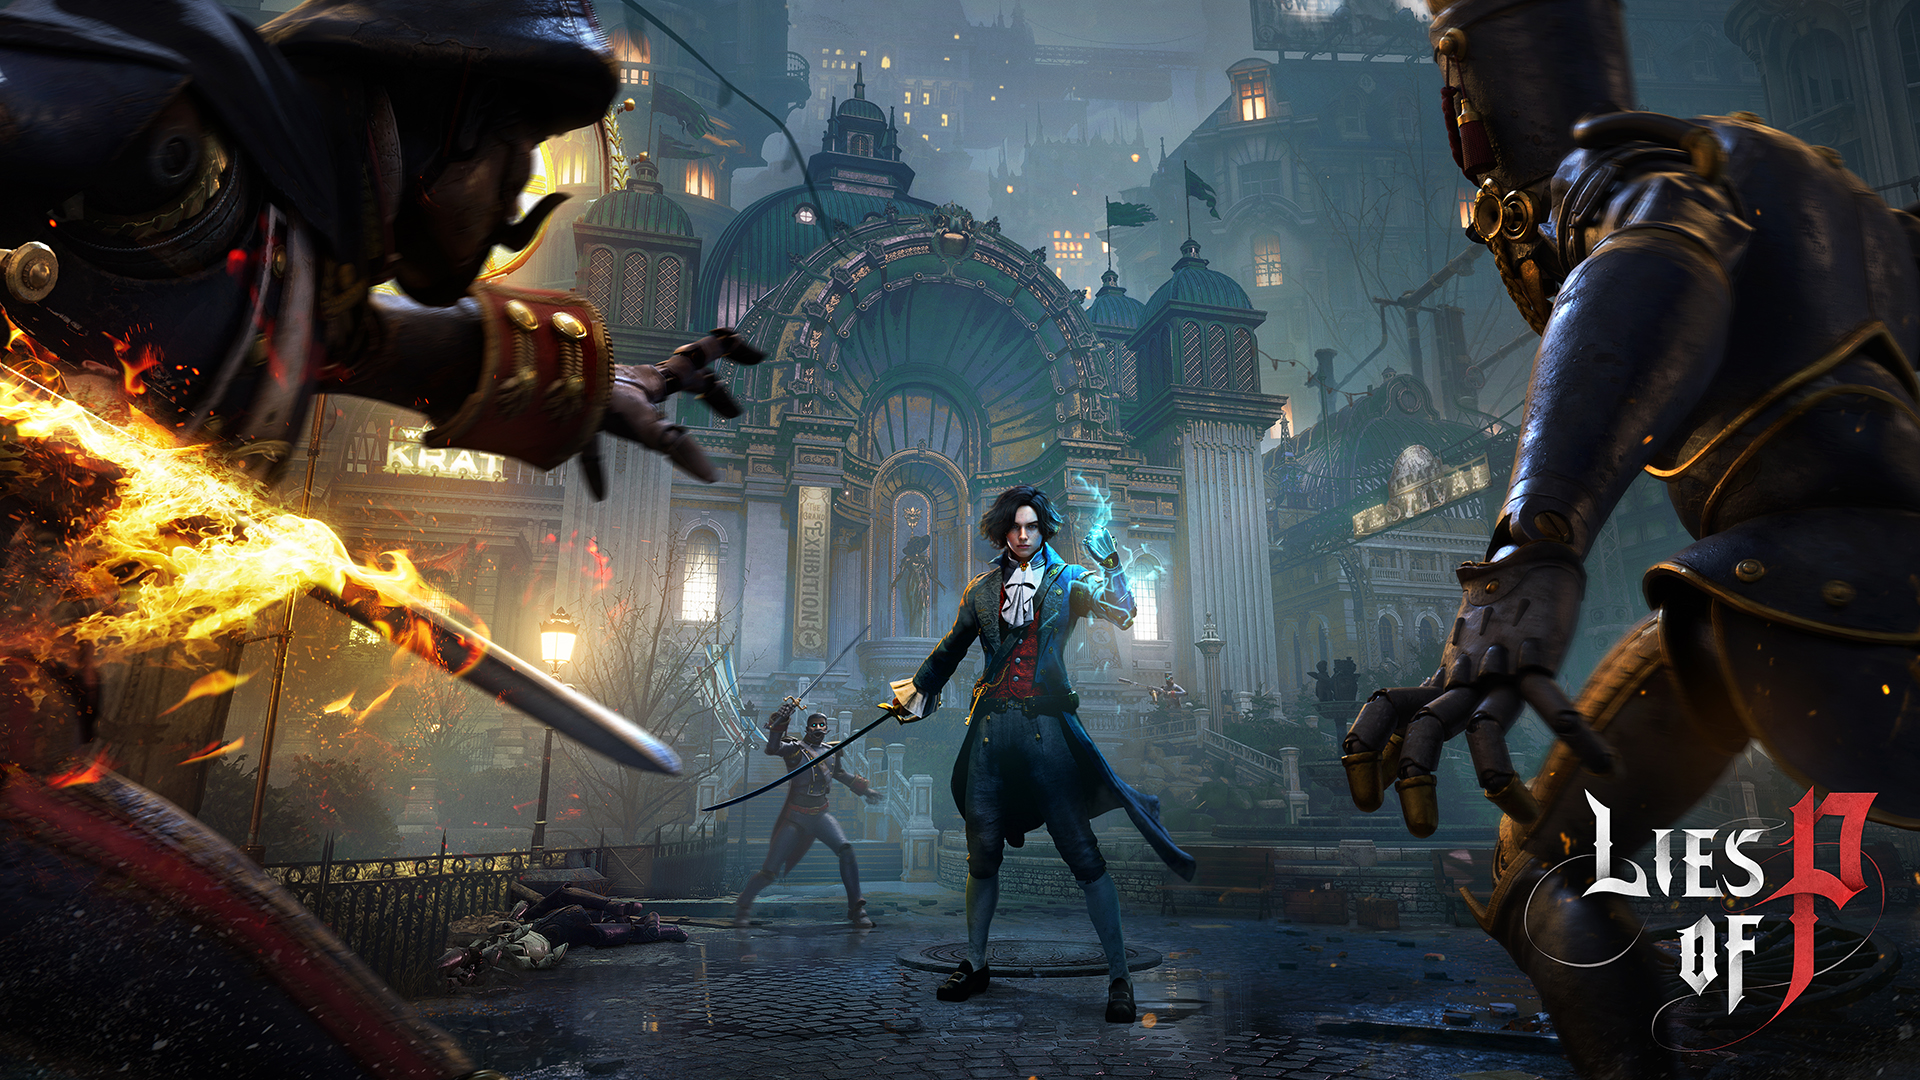 The key art for Lies of P. Pinocchio is standing between three enemies. He's holding a sword with one hand while his other glows blue. He is in front of a very elaborate building, with a sign nearby for a festival.